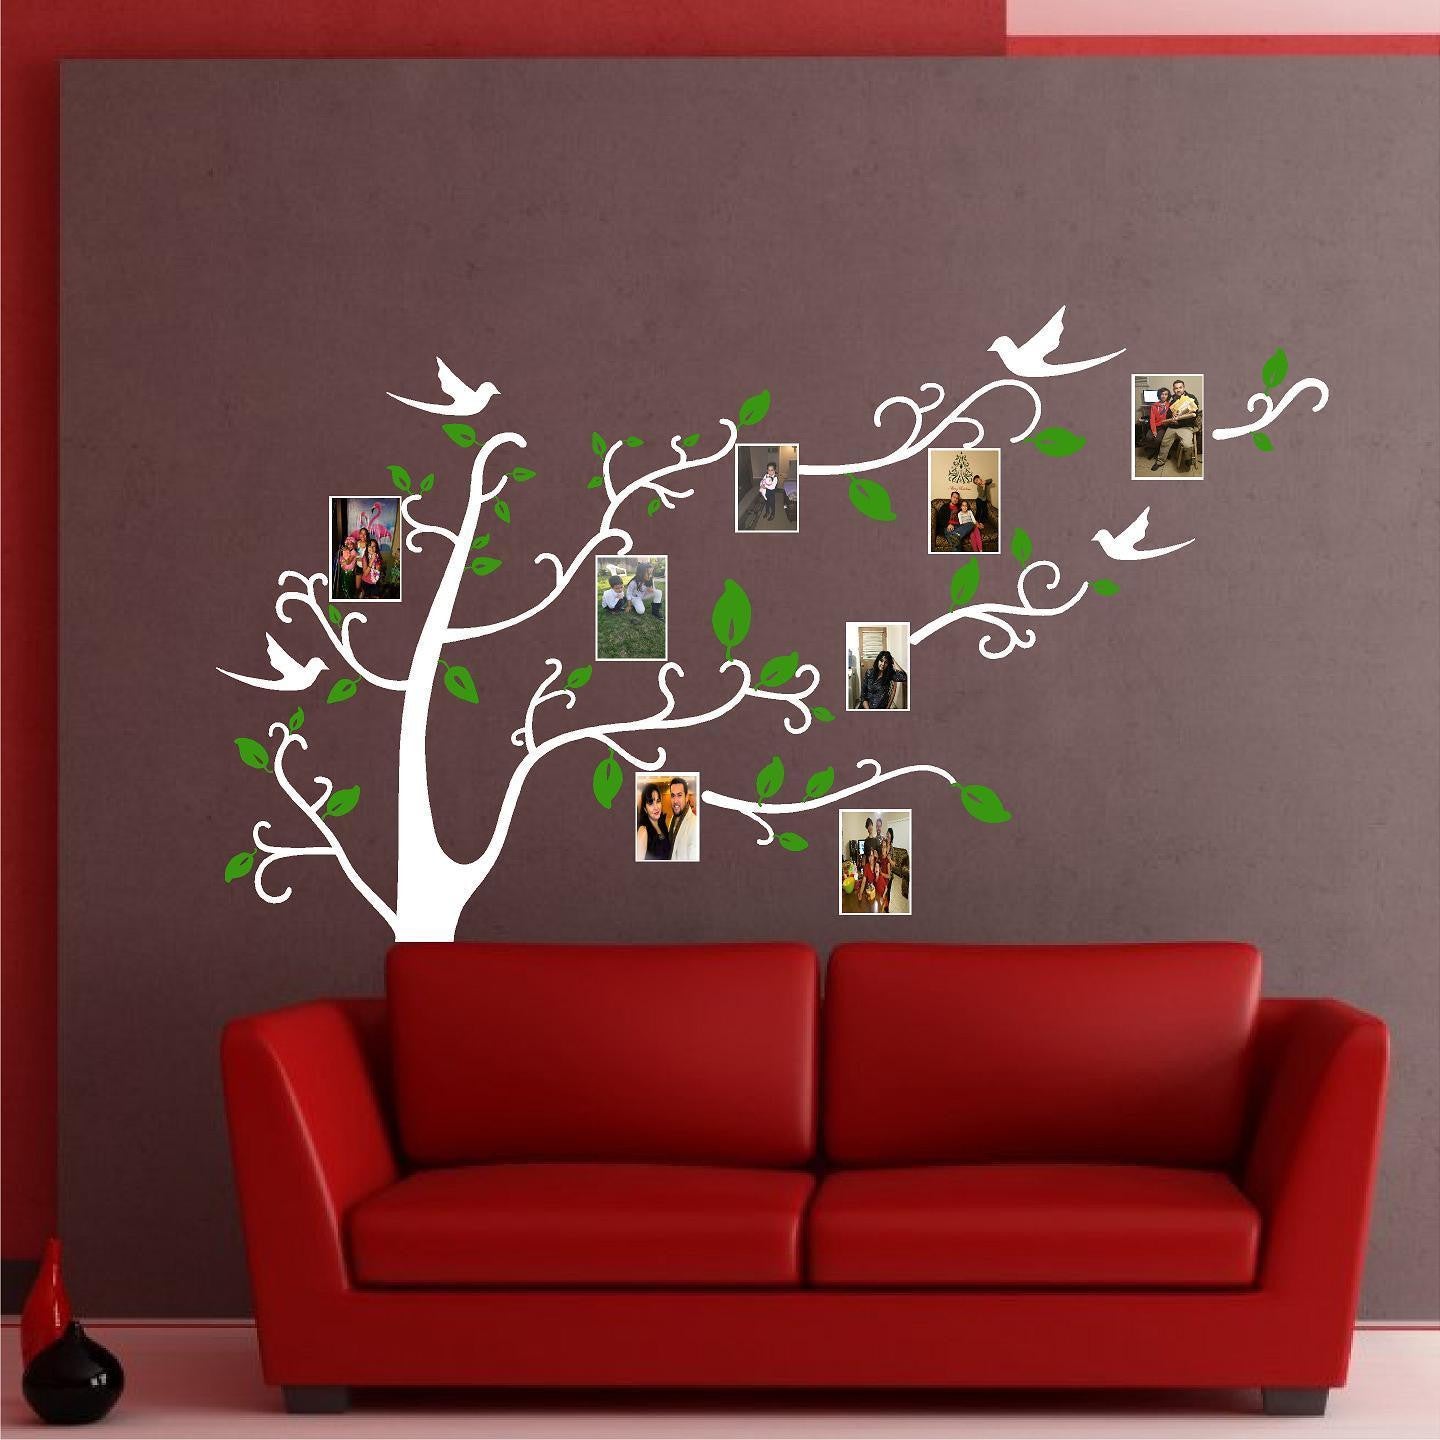 Stickers. Vinyl Wall Decal. Quotes. Tree. Photo Frame. Tree Branch. My Precious Memories.